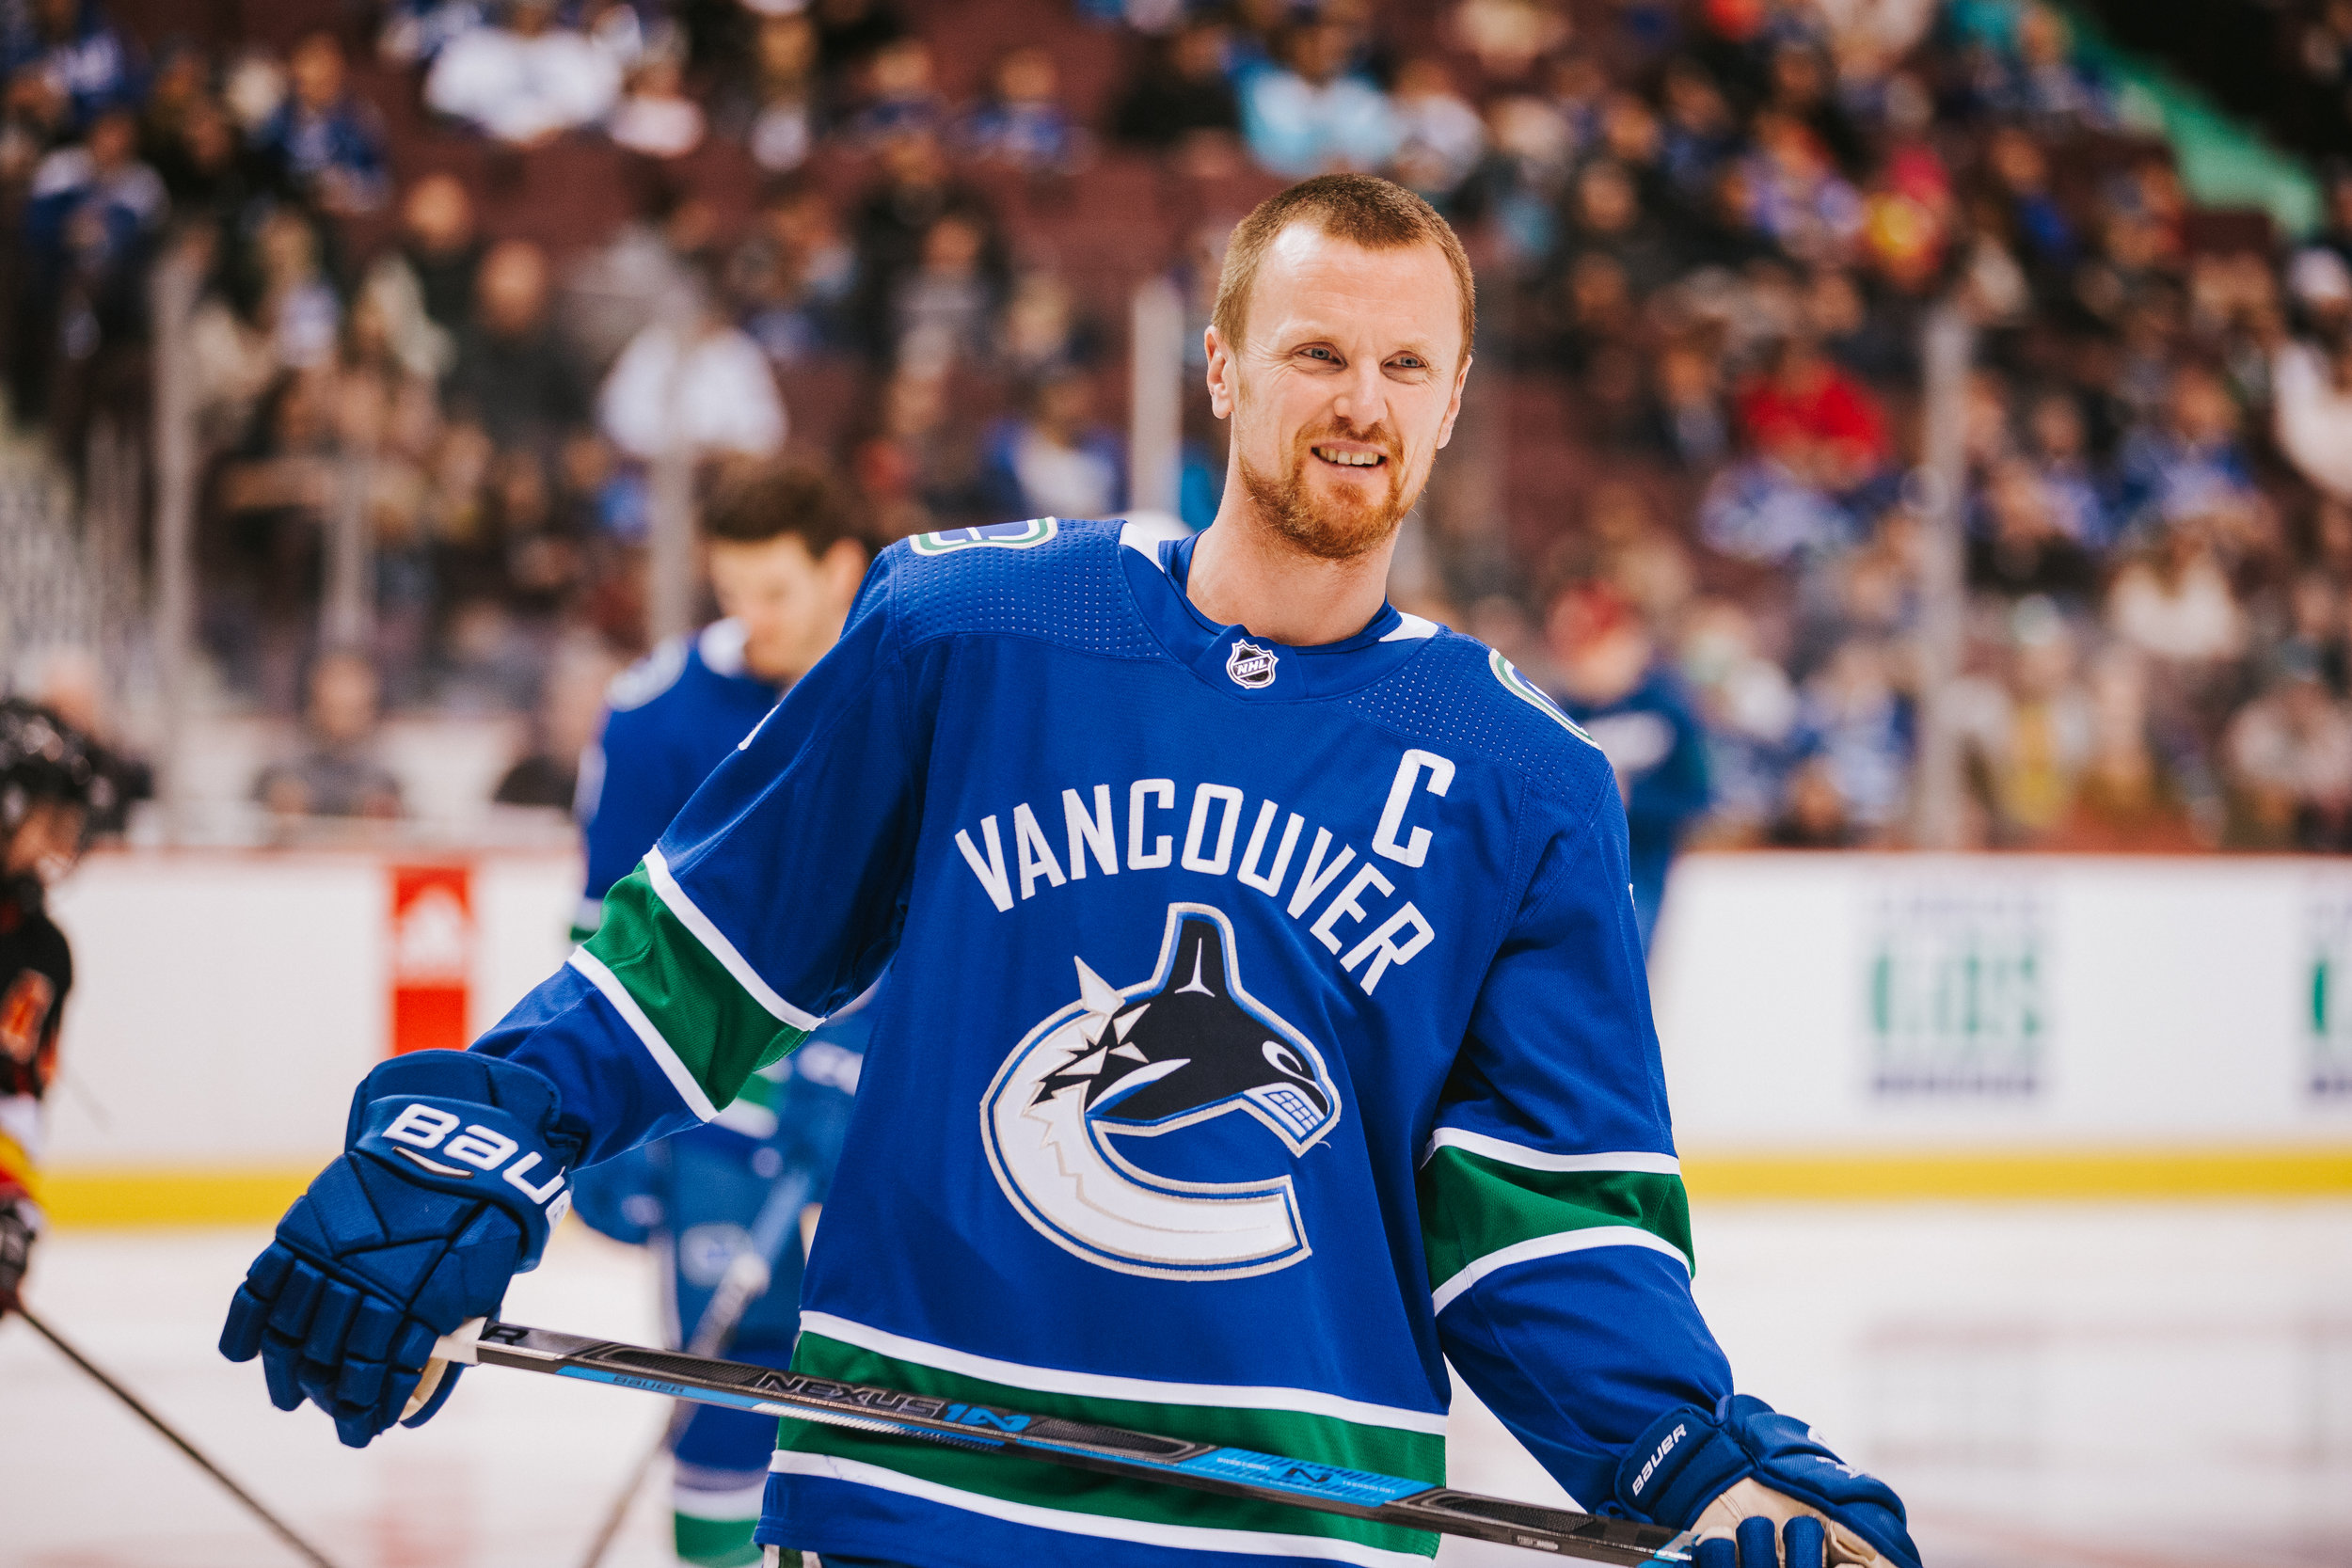 vancouver canucks chinese new year jersey, Off 68%